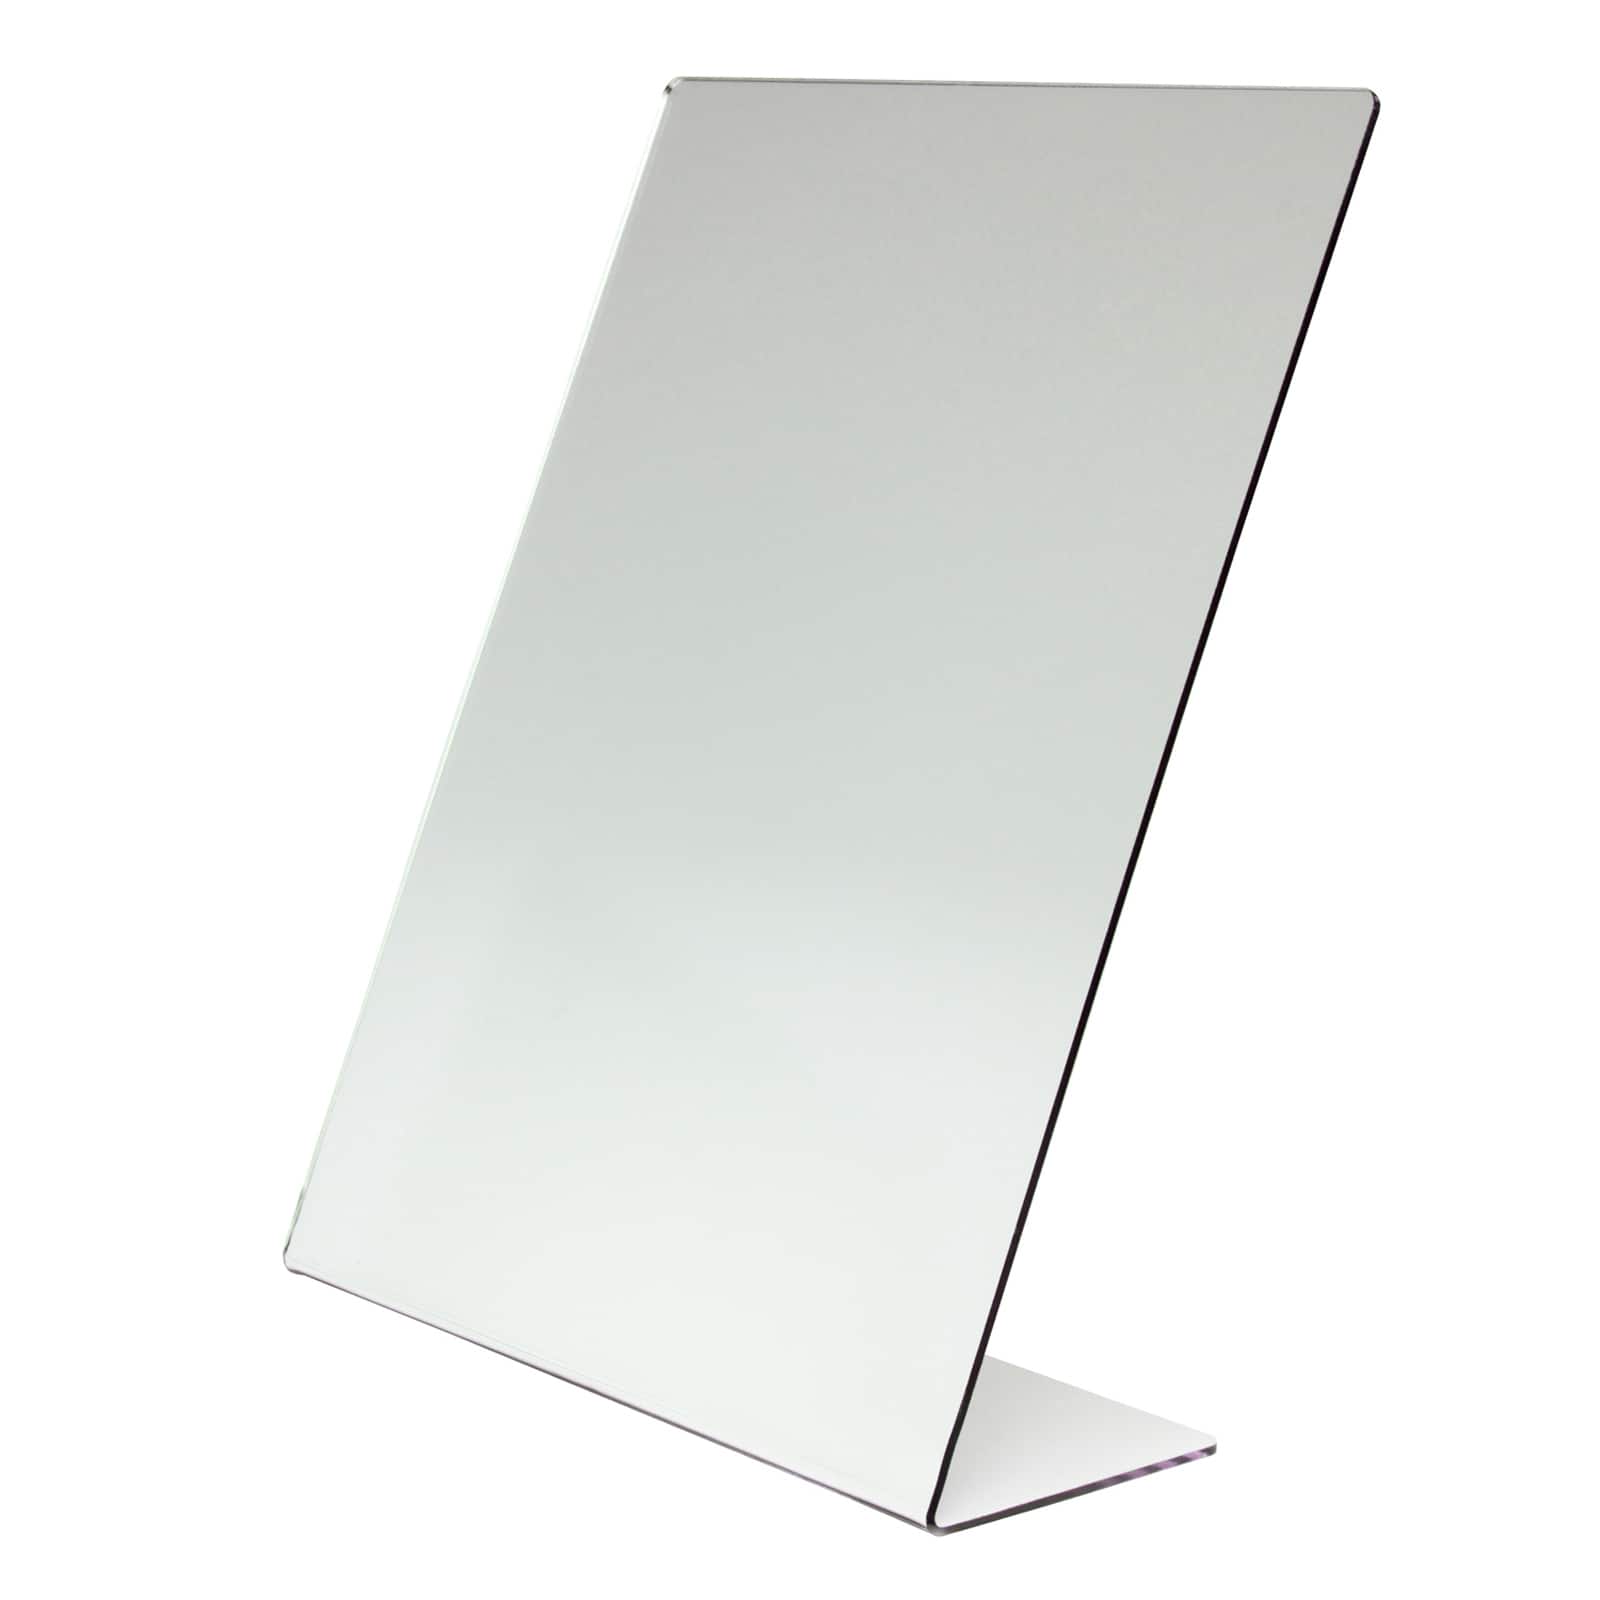 Single-Sided Mirror, 2 Count